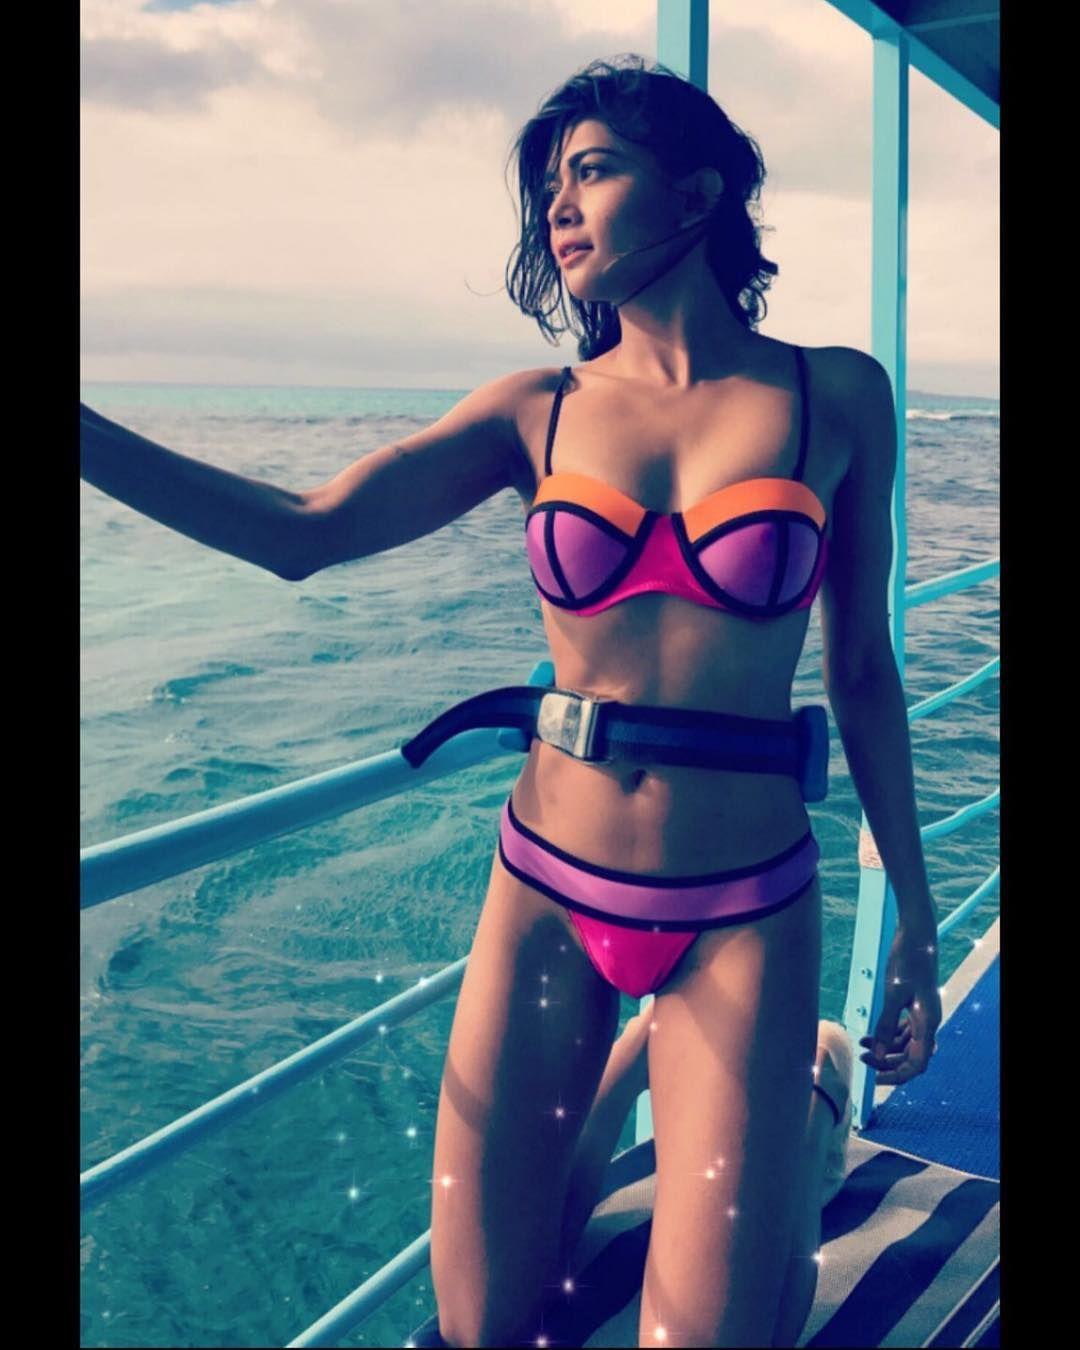 Sakshi Pradhan Bikini Images Will Give You a Chill Pill